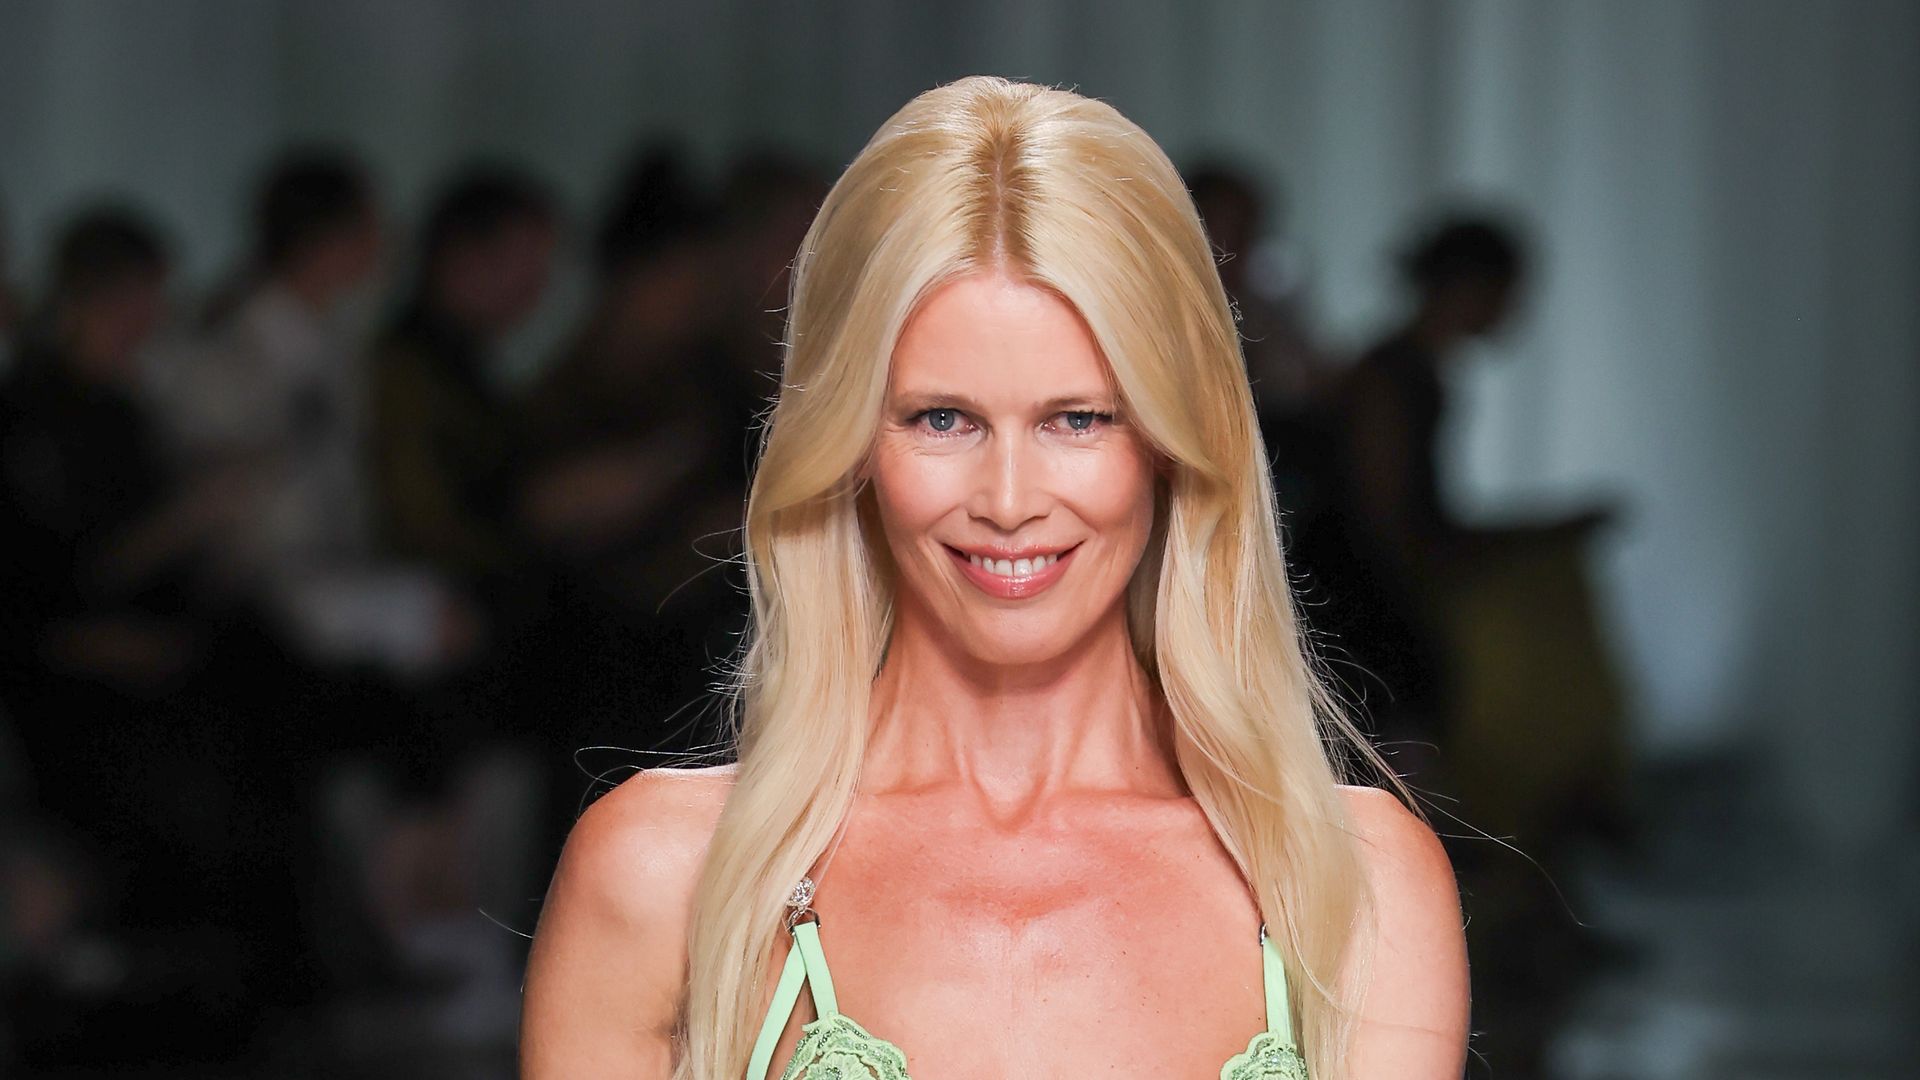 Claudia Schiffer just praised Kylie Jenner for copying her vintage Chanel moment